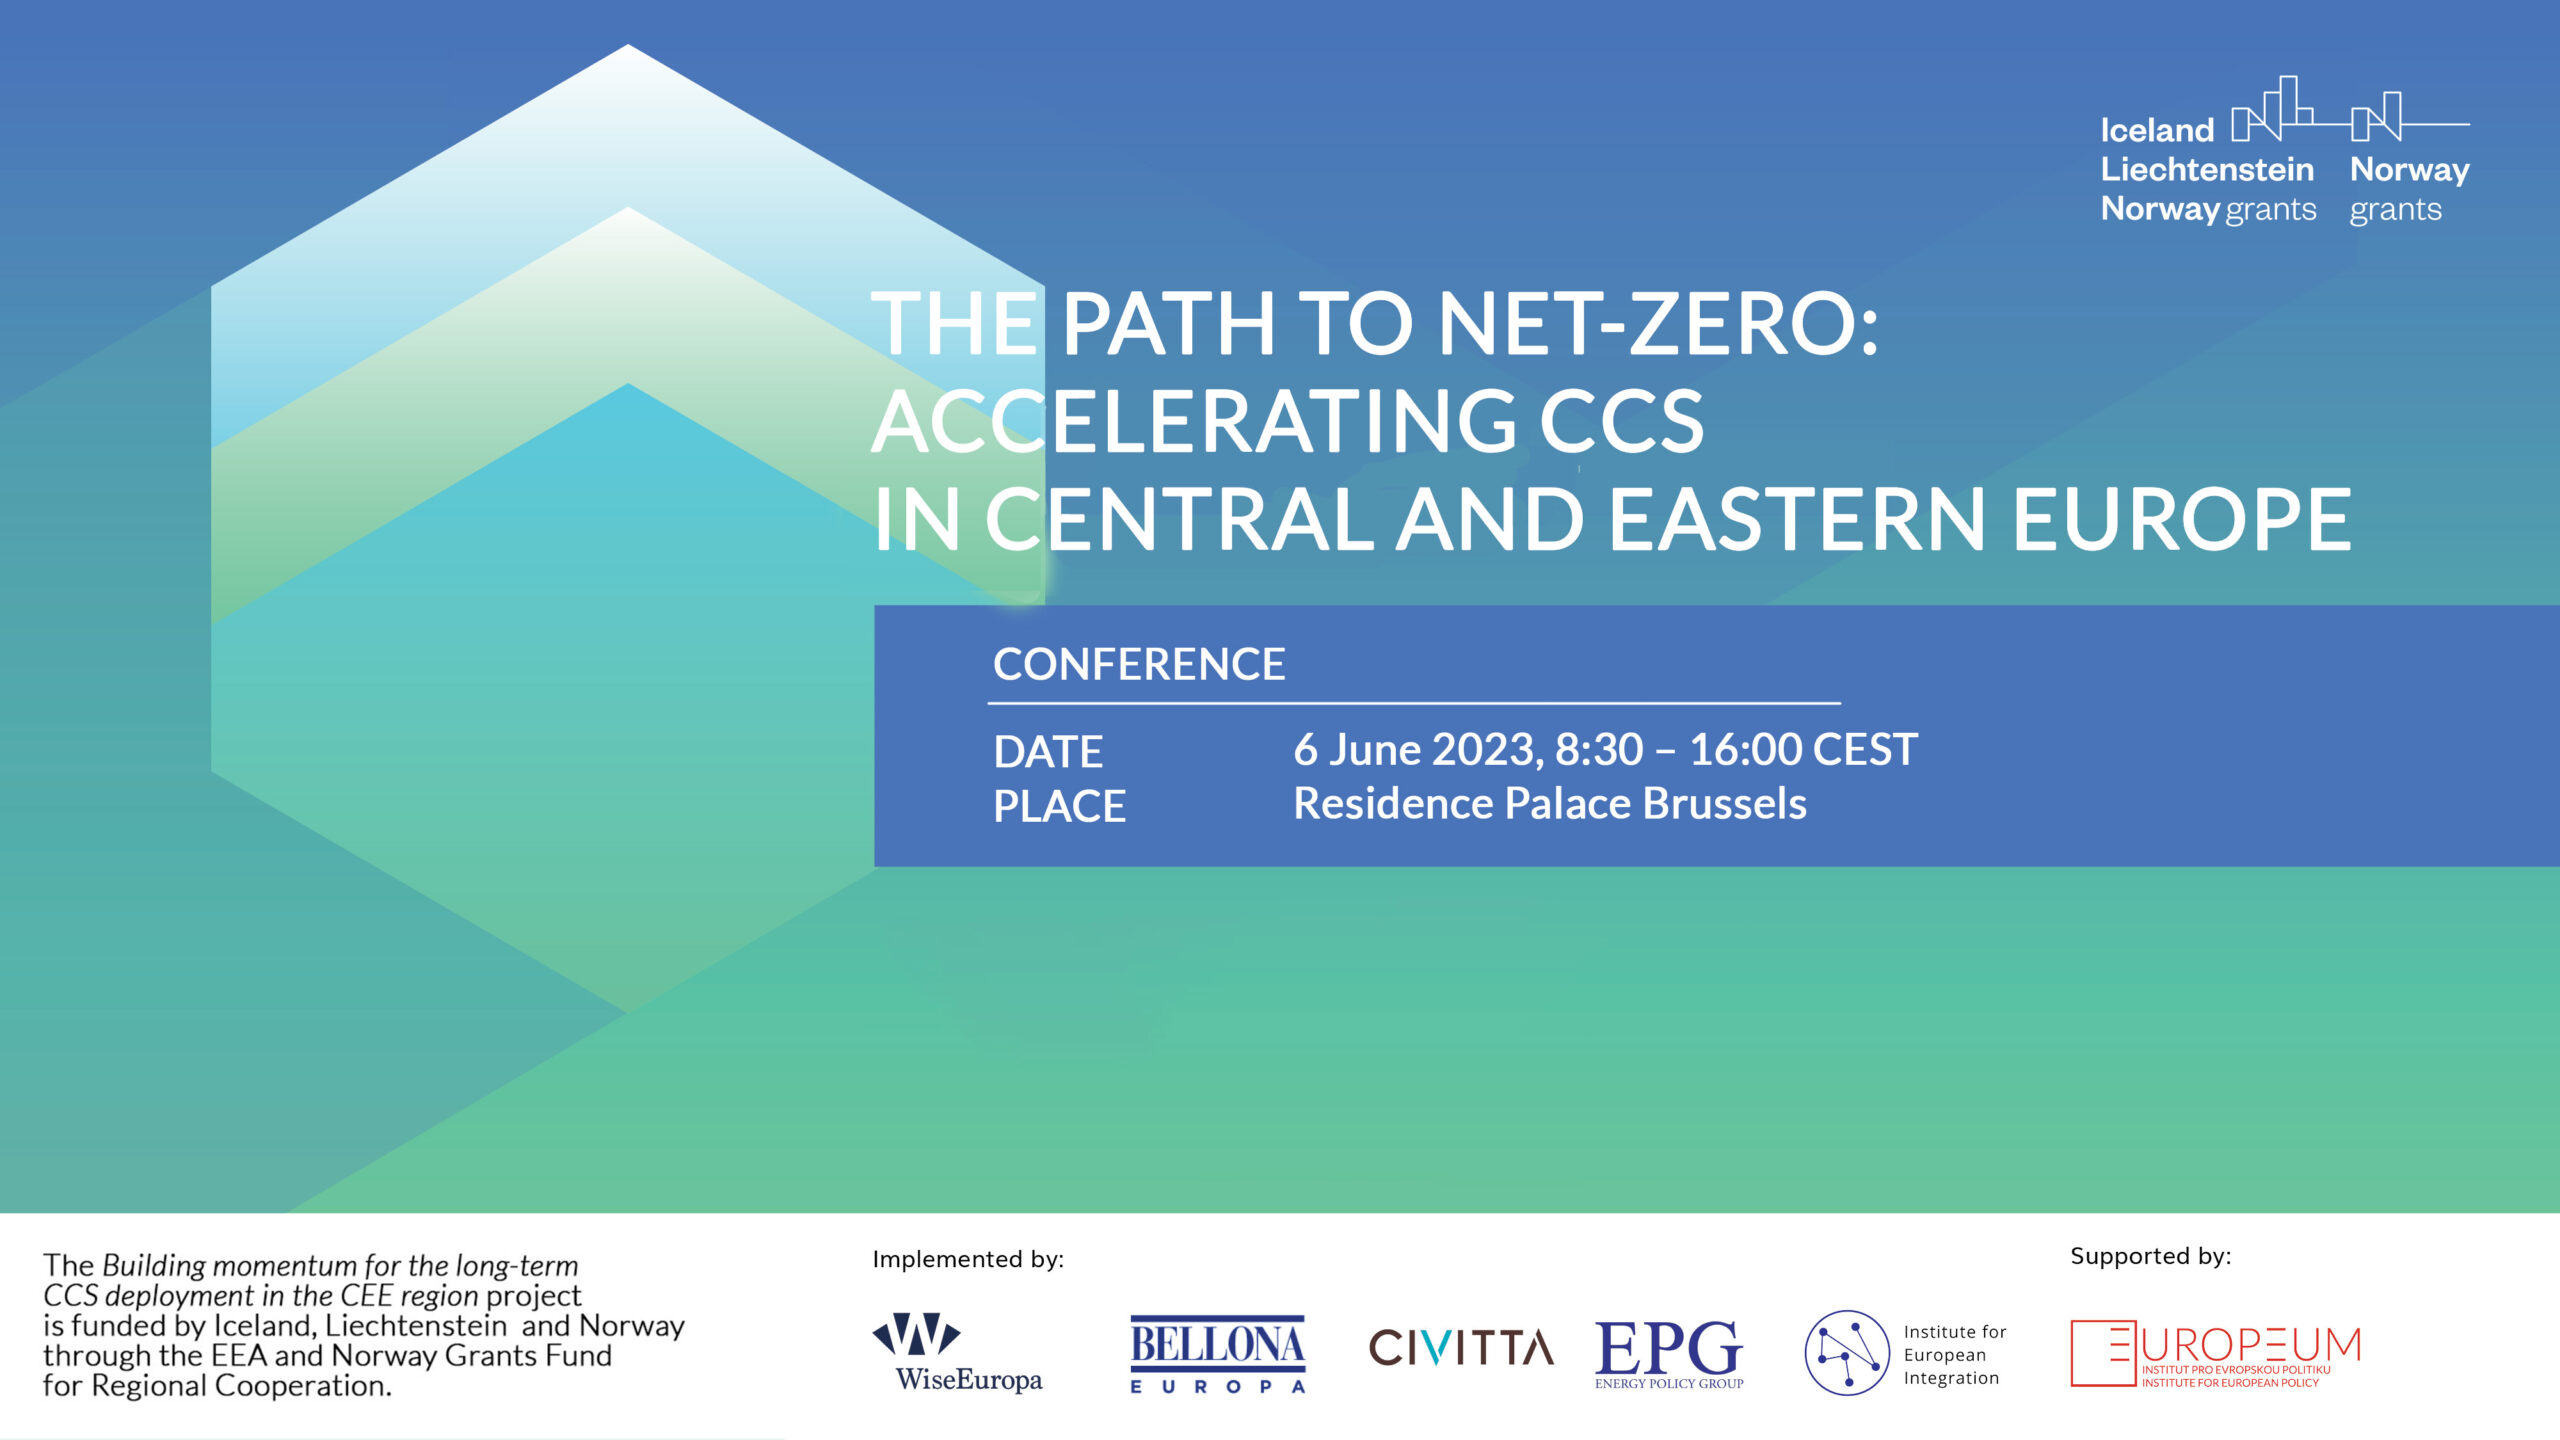 The Path to Net-Zero: Accelerating CCS in Central and Eastern Europe